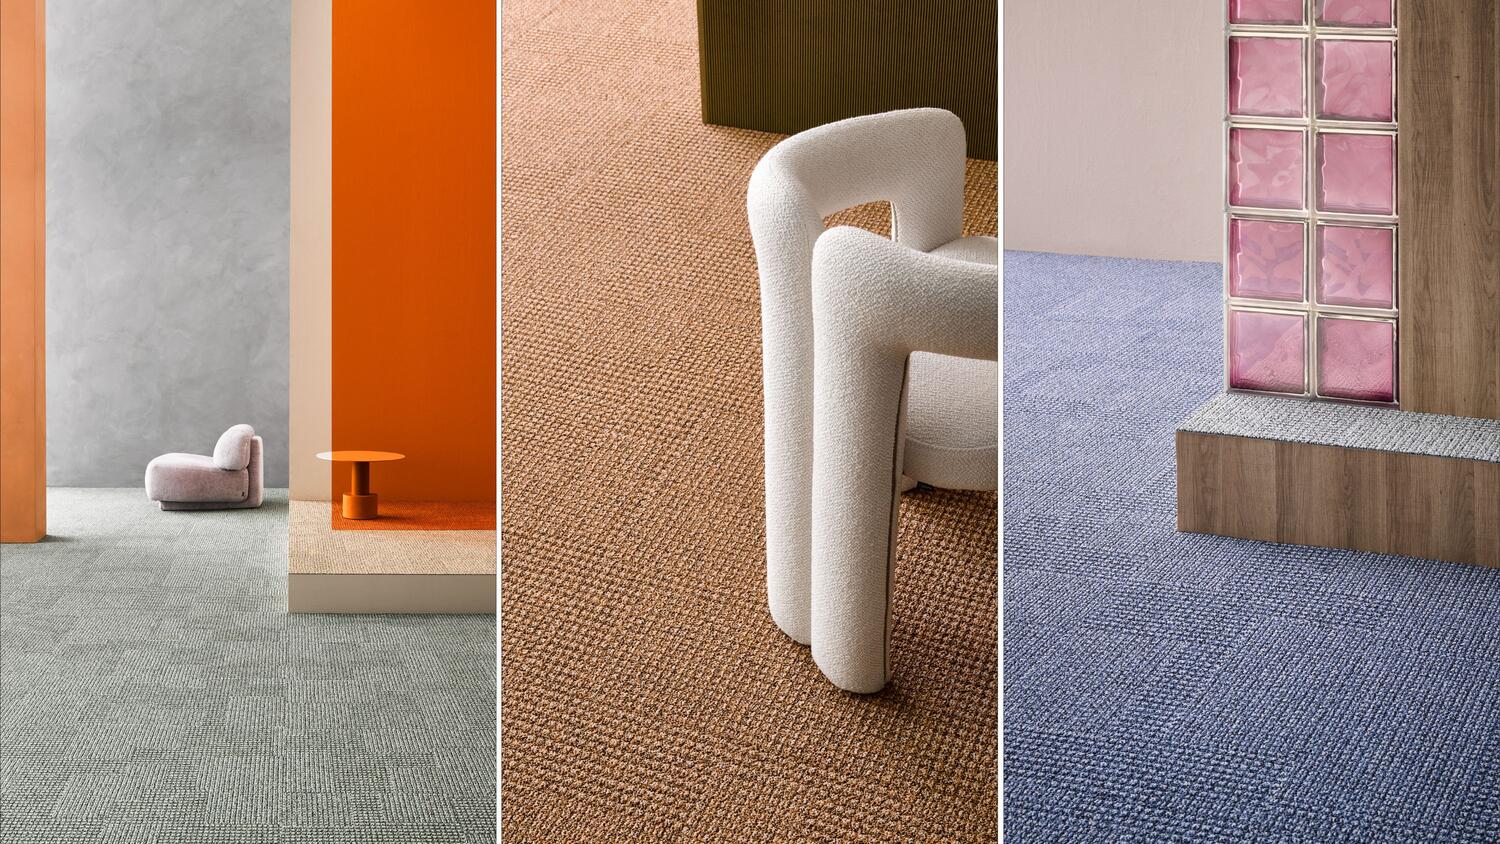 DESSO and Patricia Urquiola graphic carpet tiles for workplace